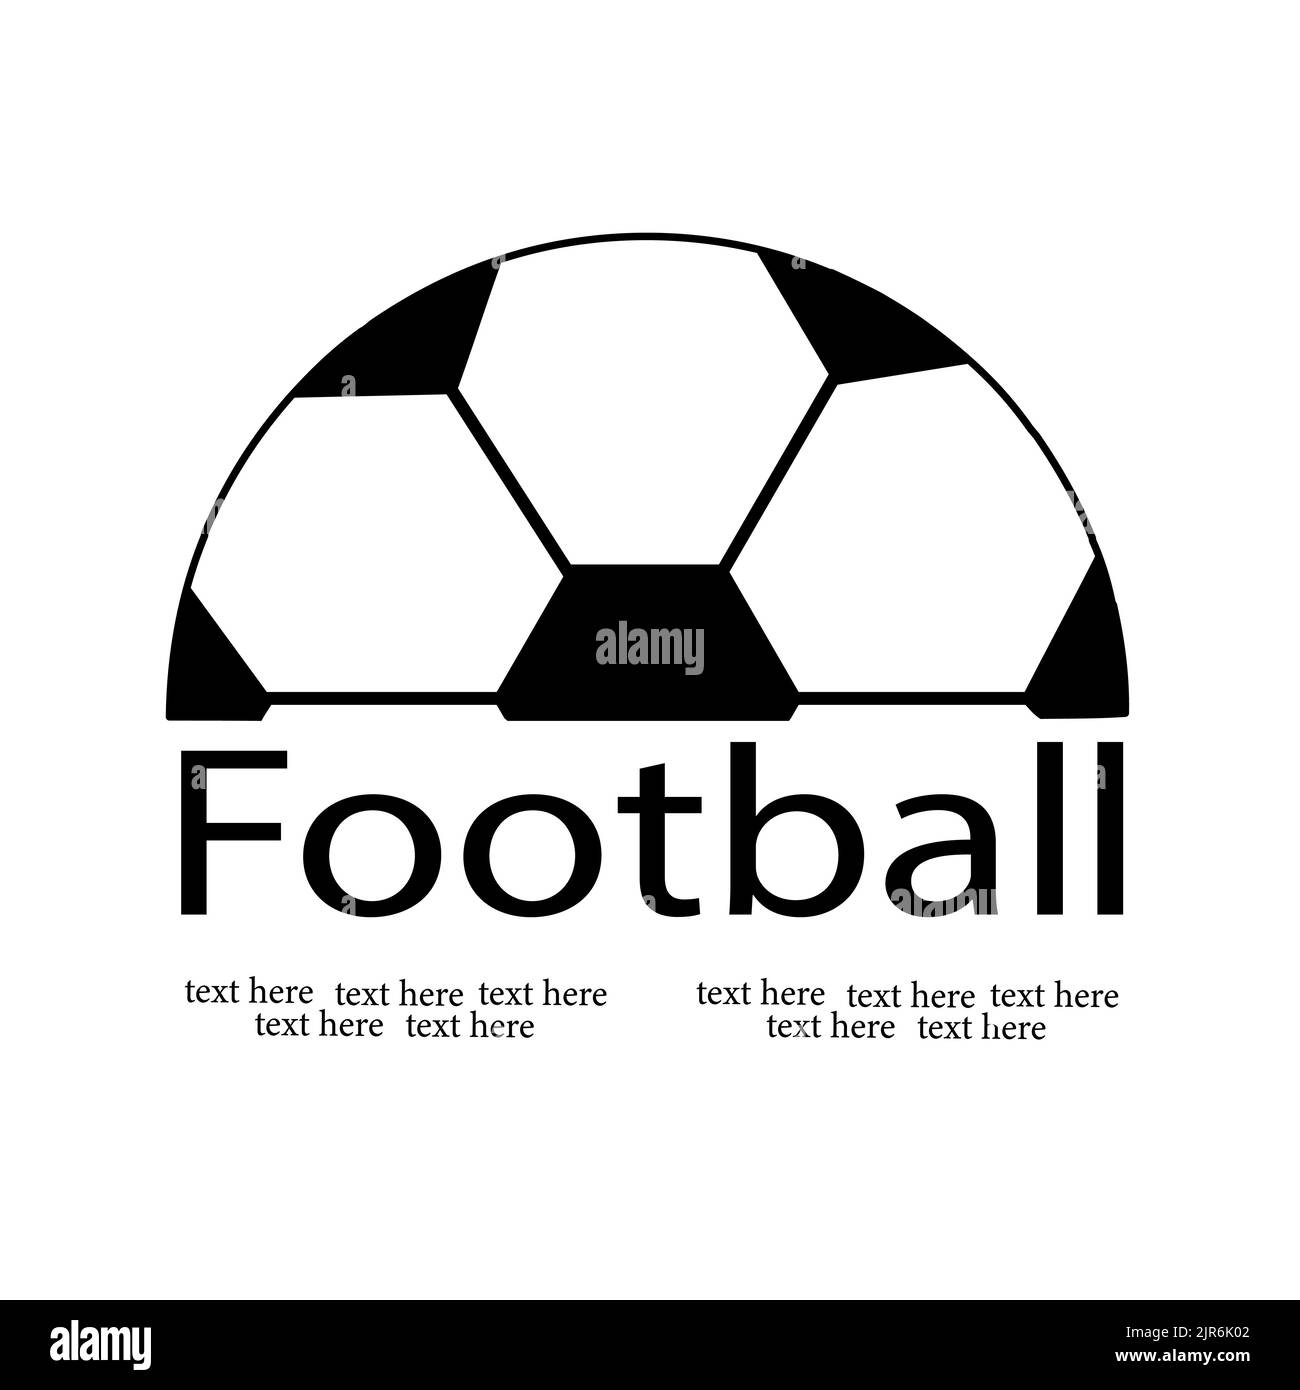 Soccer ball for a logo, postcard or design with a place for the text. Sports, football, game. Flat illustration. Stock Vector